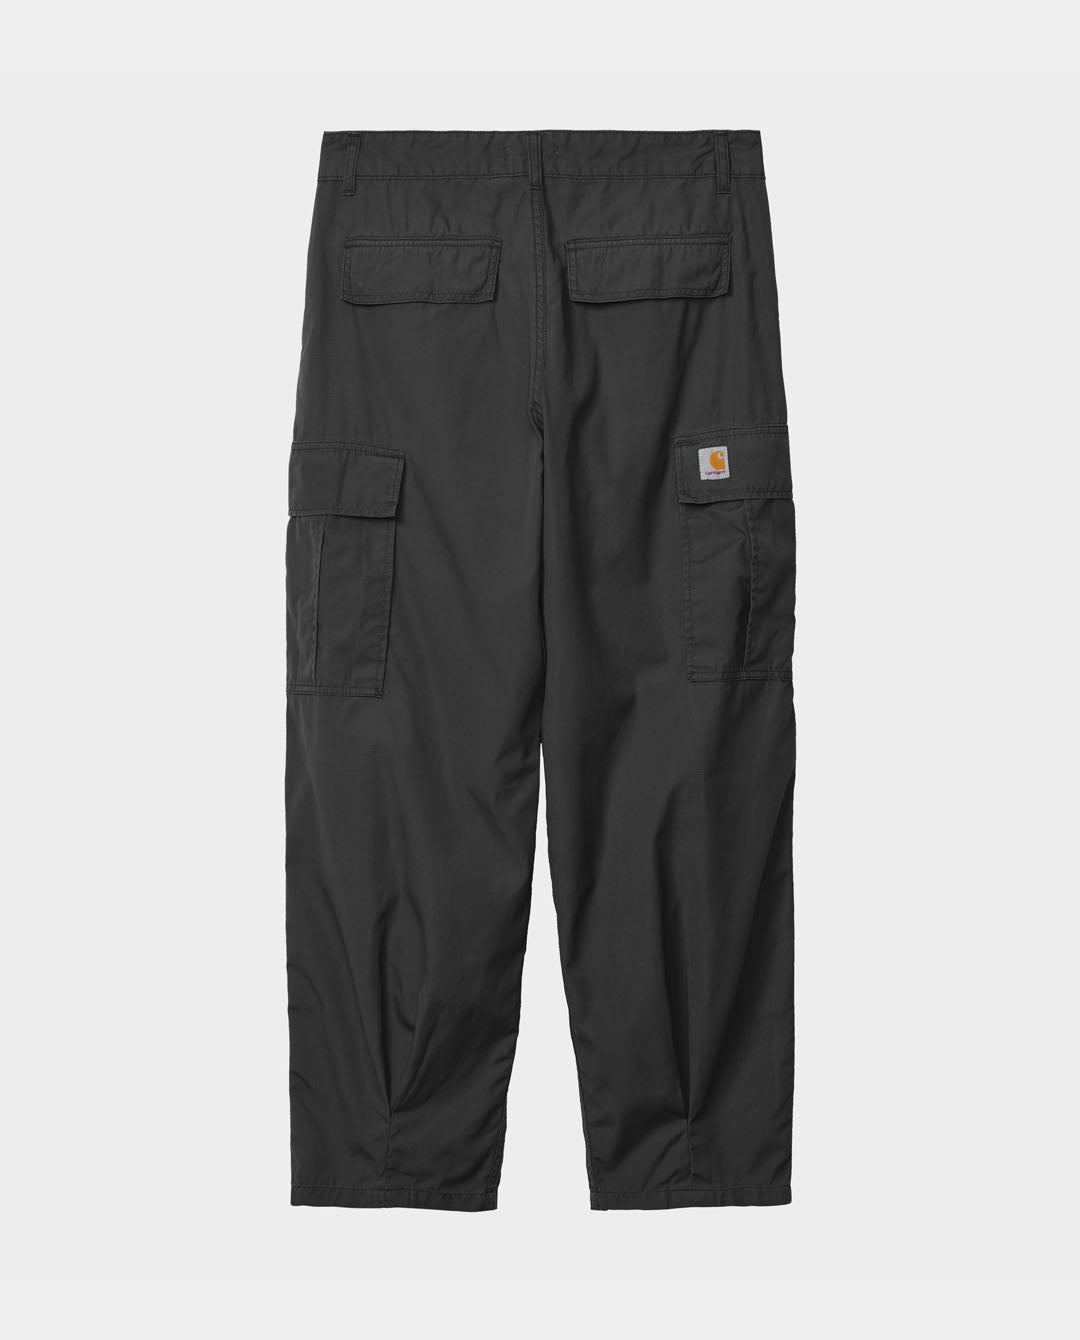 Carhartt WIP - Cole Cargo Pant - Black Garment Dyed